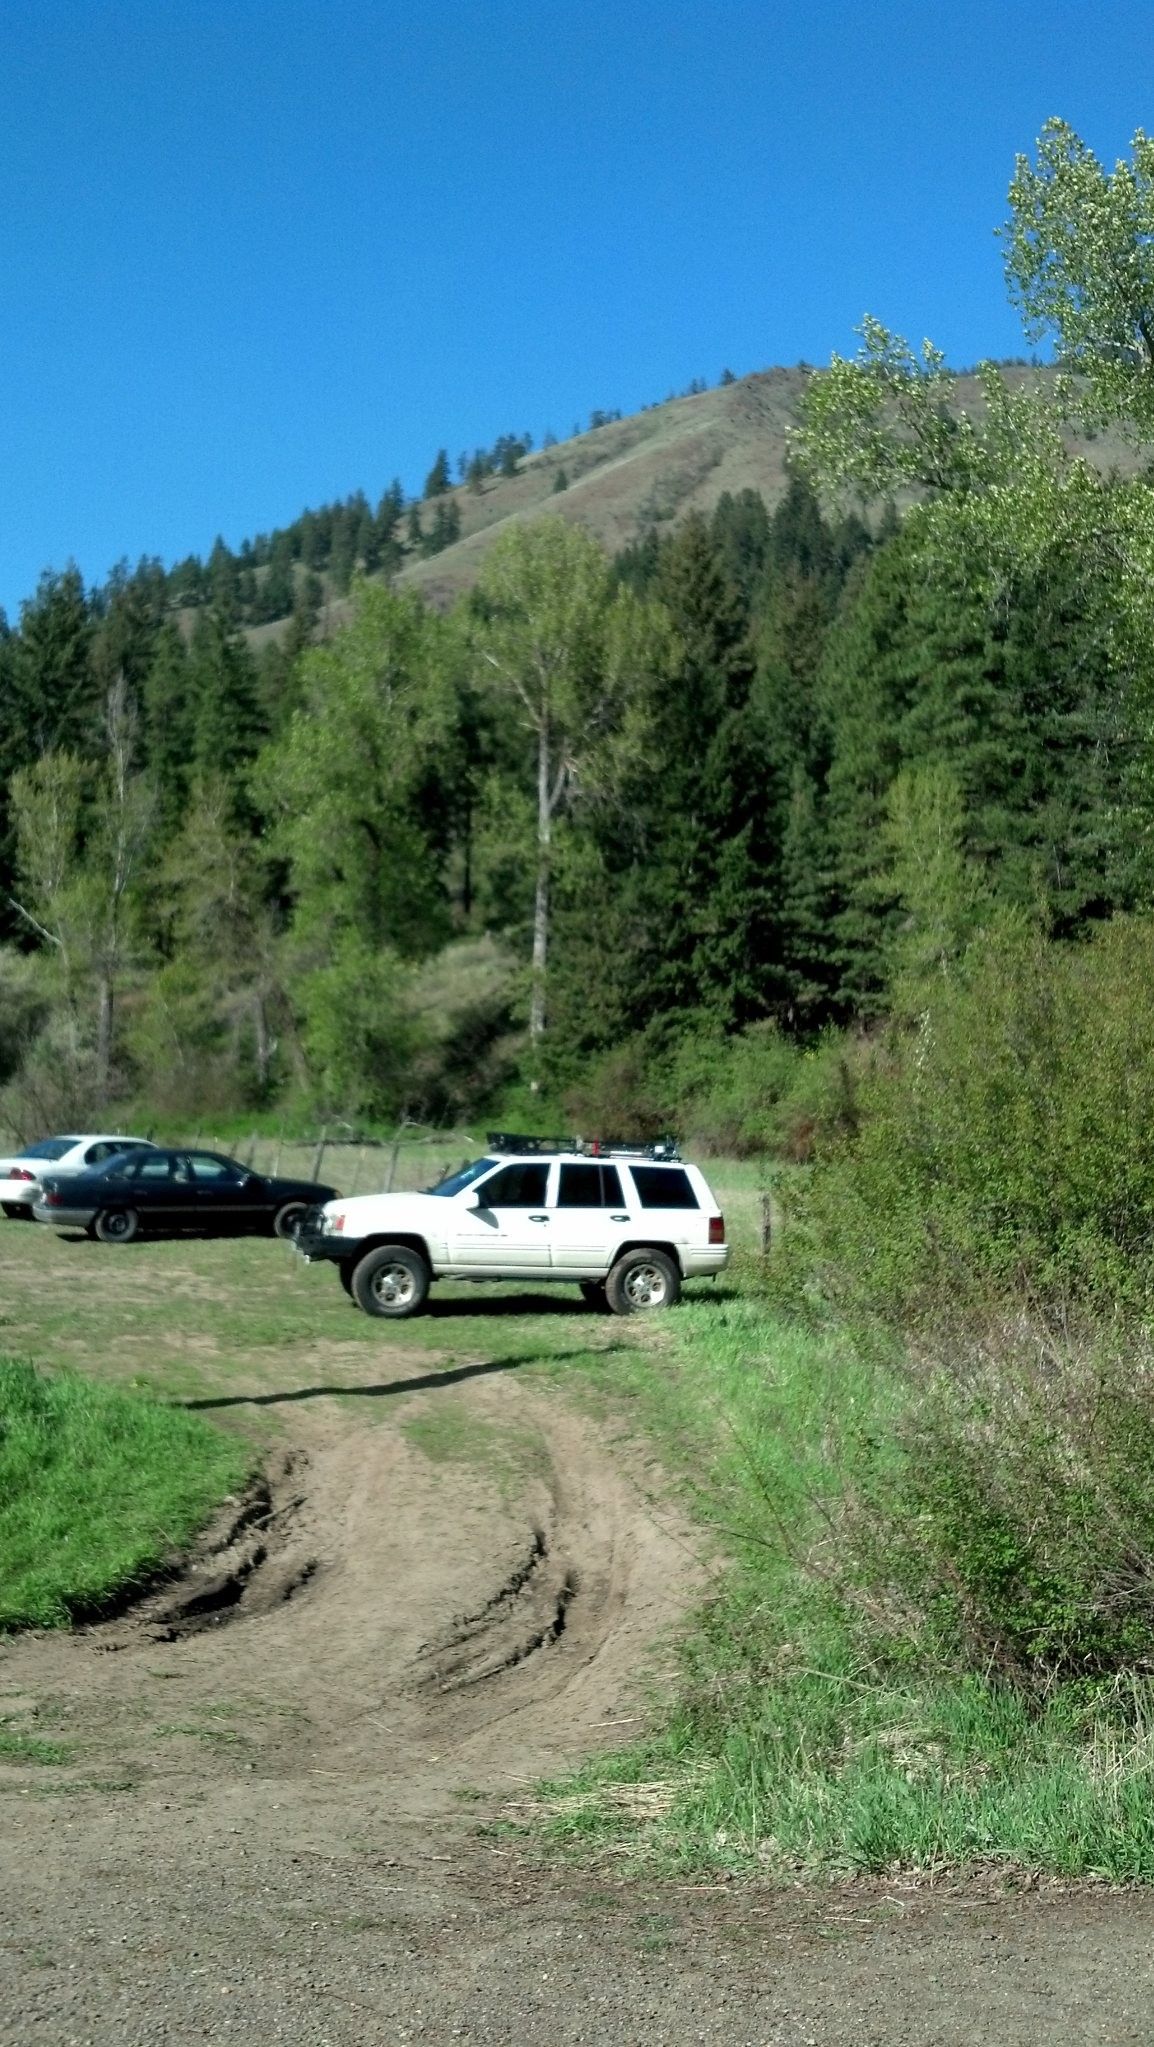 Small parking area just south of Liberty WA. Must park here to hike to gated roads to the First Creek agate and geode digs.